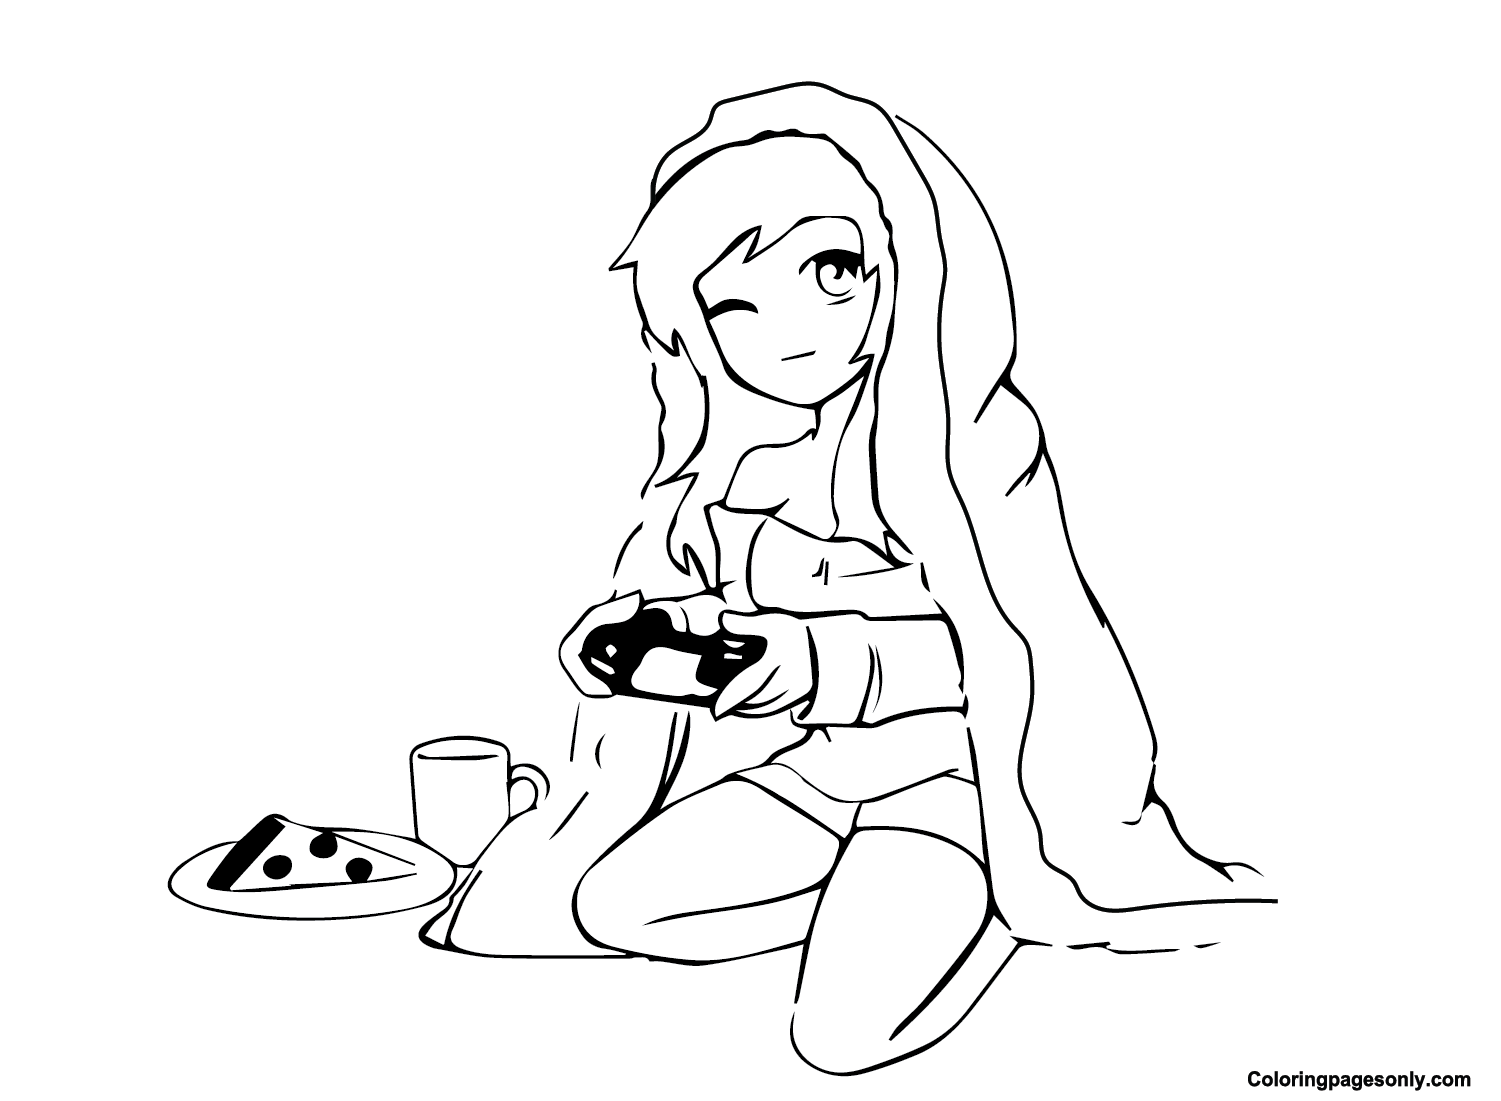 Aphmau Free Coloring Pages